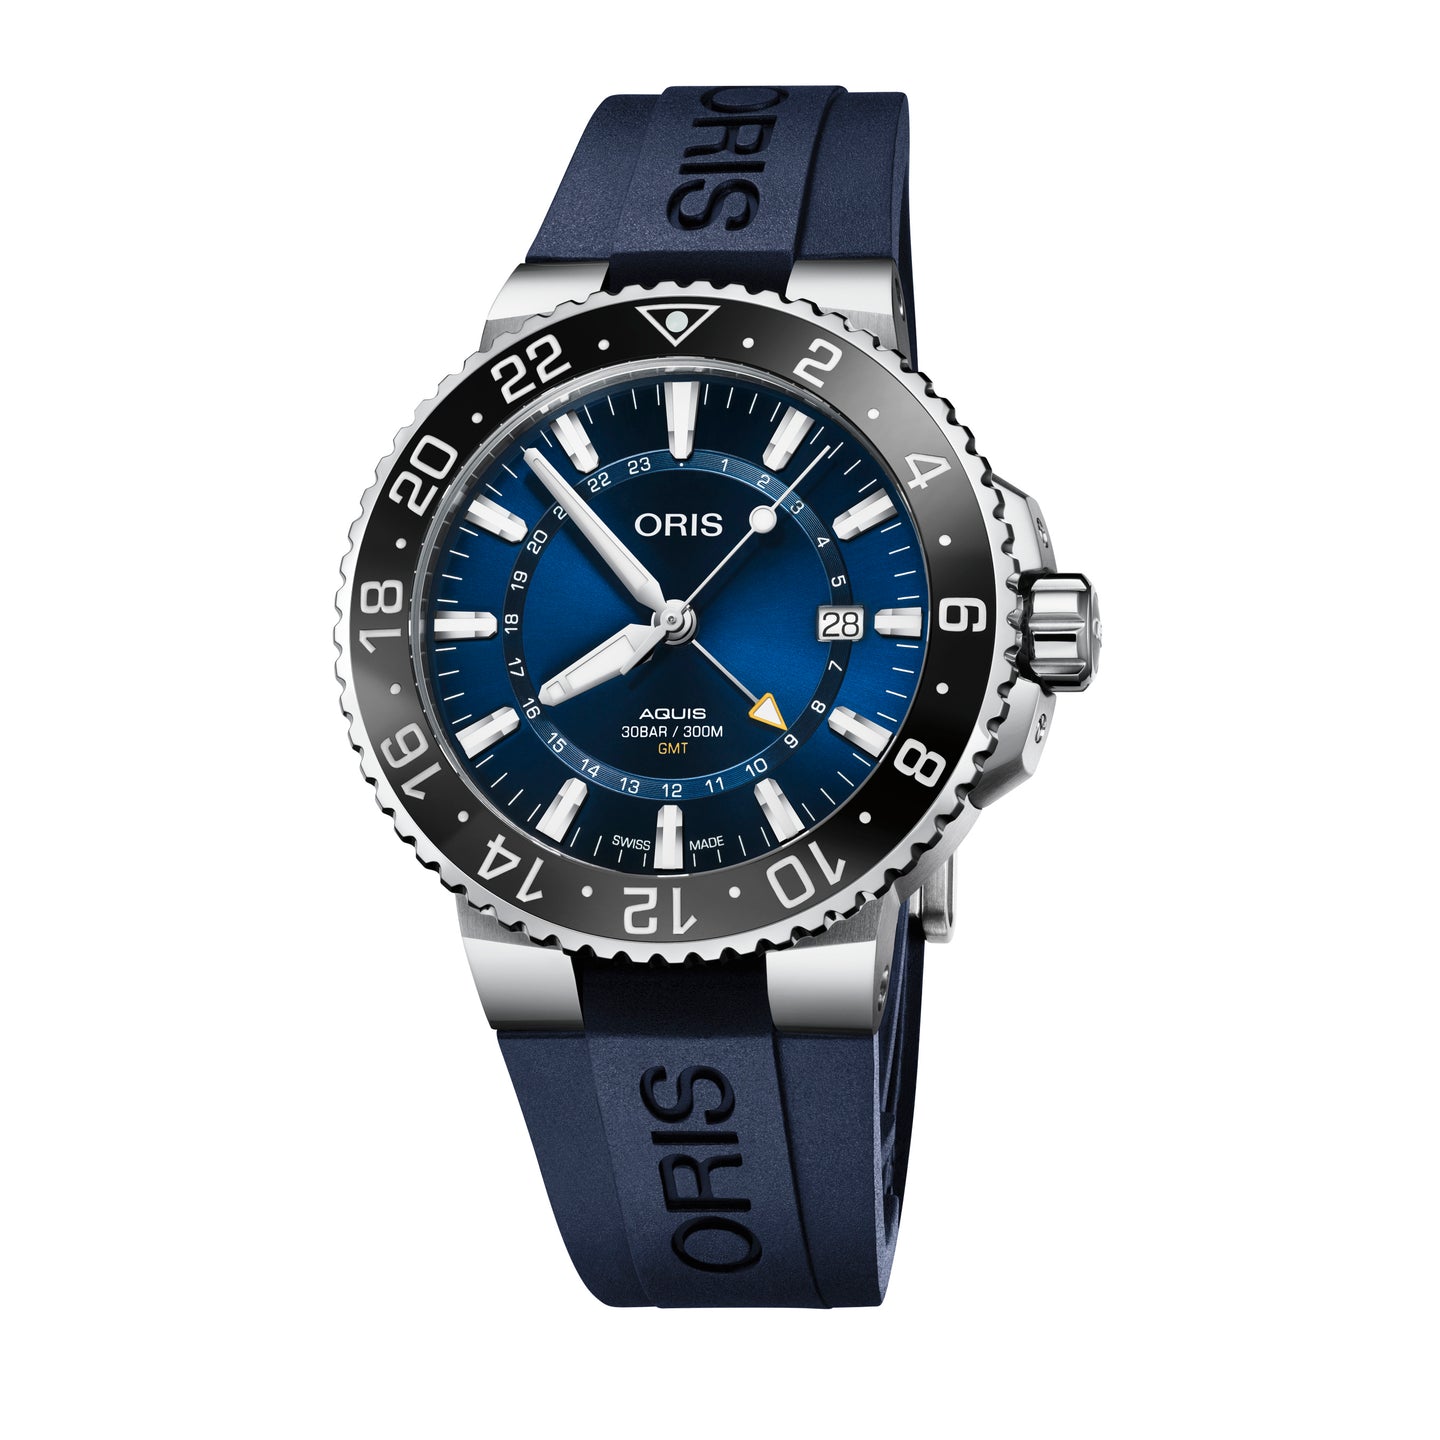 Oris Aquis GMT Date Automatic Watch with Blue Dial and Rubber Strap